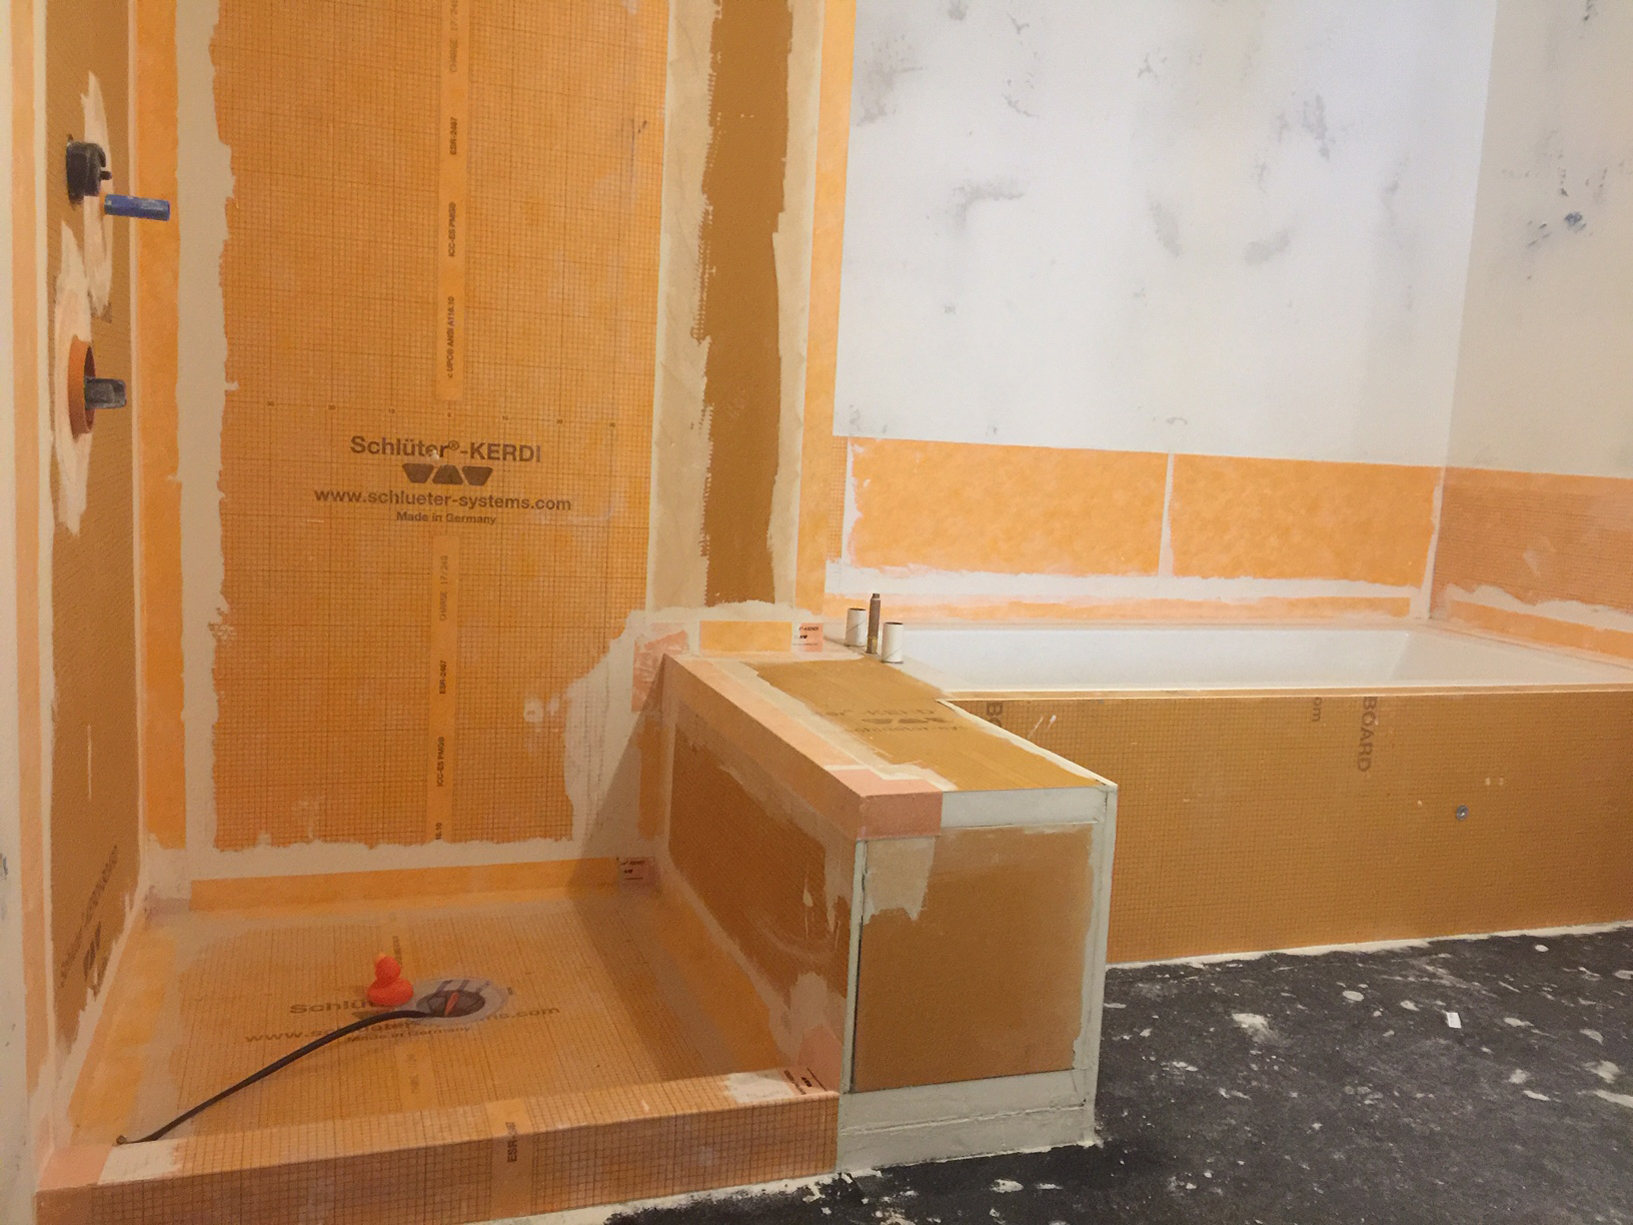 Waterproofing membrane was wrapped from the wall to the tub deck to create a waterproof splash zone for the tub area.